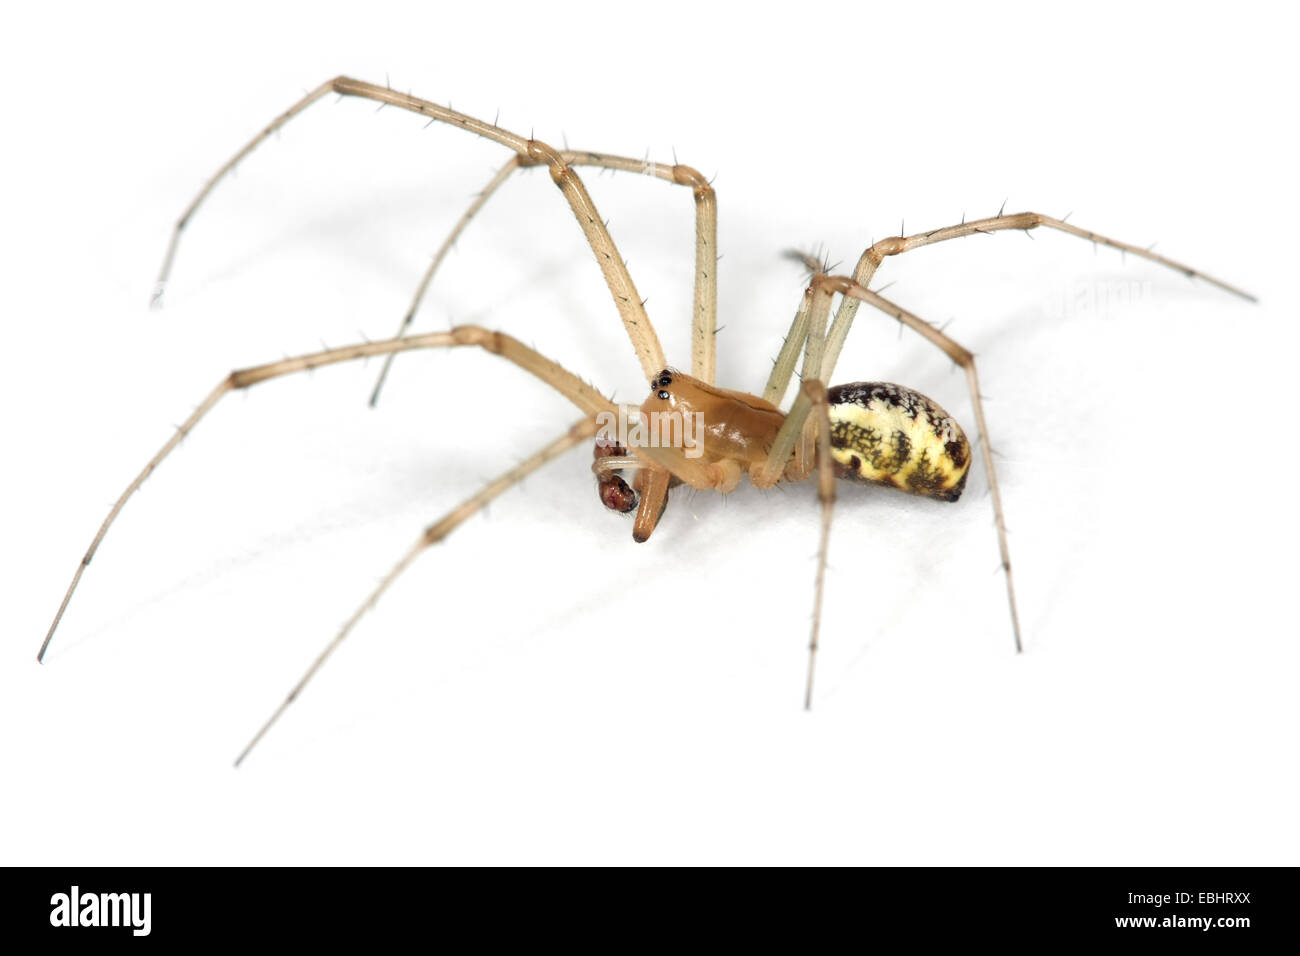 A male Common Hammock-weaver (Linyphia triangularis) spider on a white background, part of the family Linyphiidae - Sheetweb weavers. Stock Photo